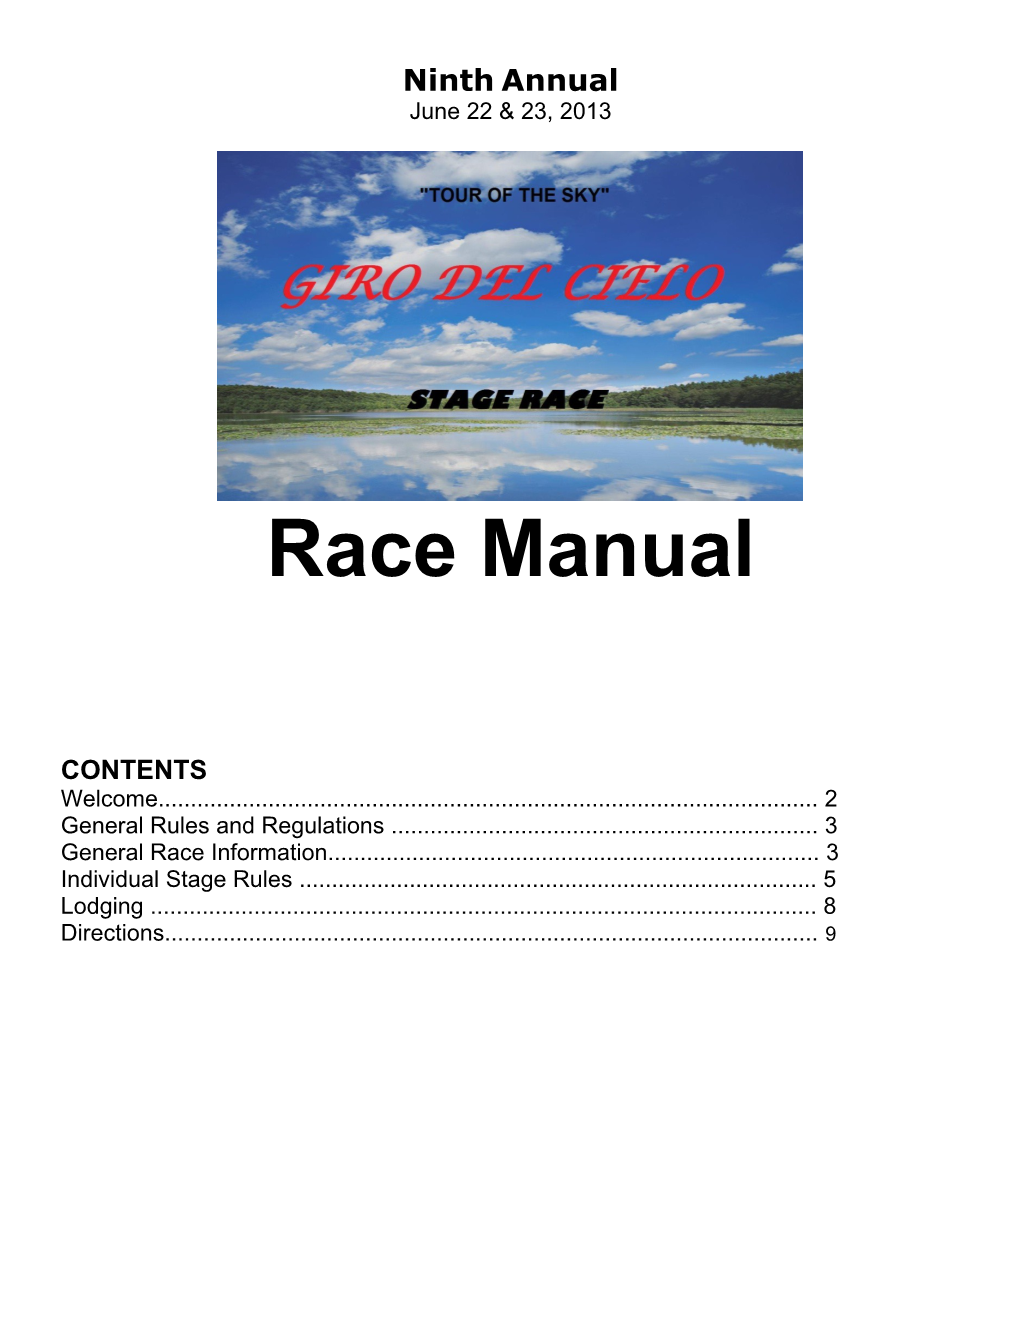 General Rules and Regulations 3